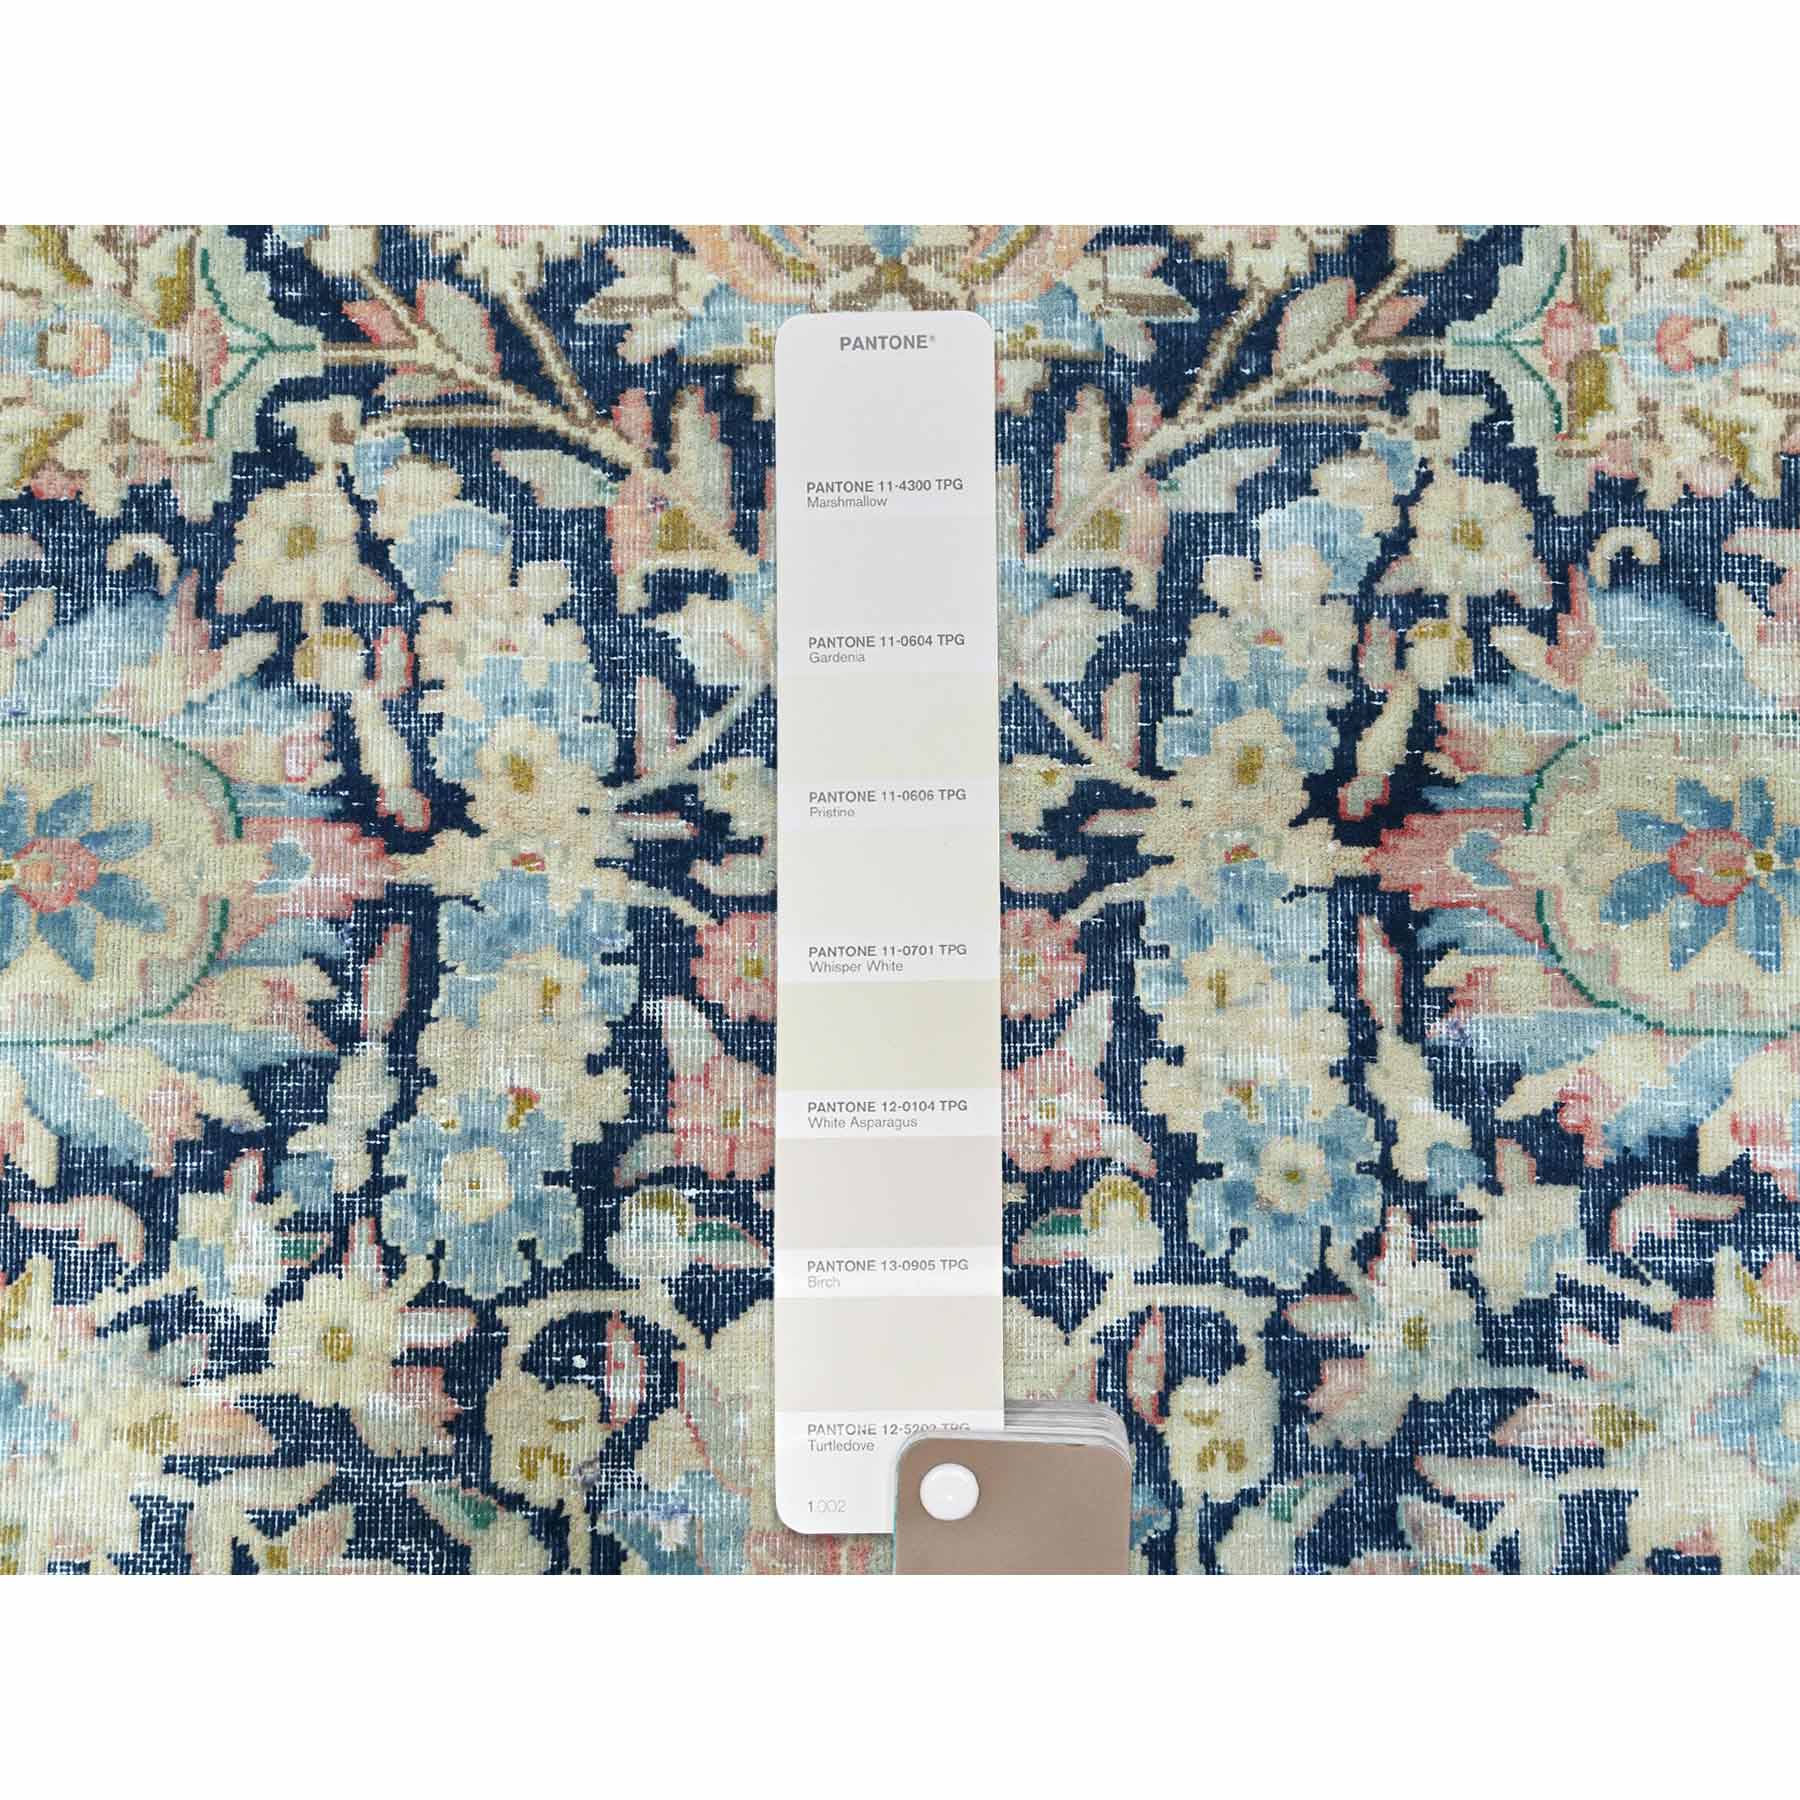 Overdyed-Vintage-Hand-Knotted-Rug-426360